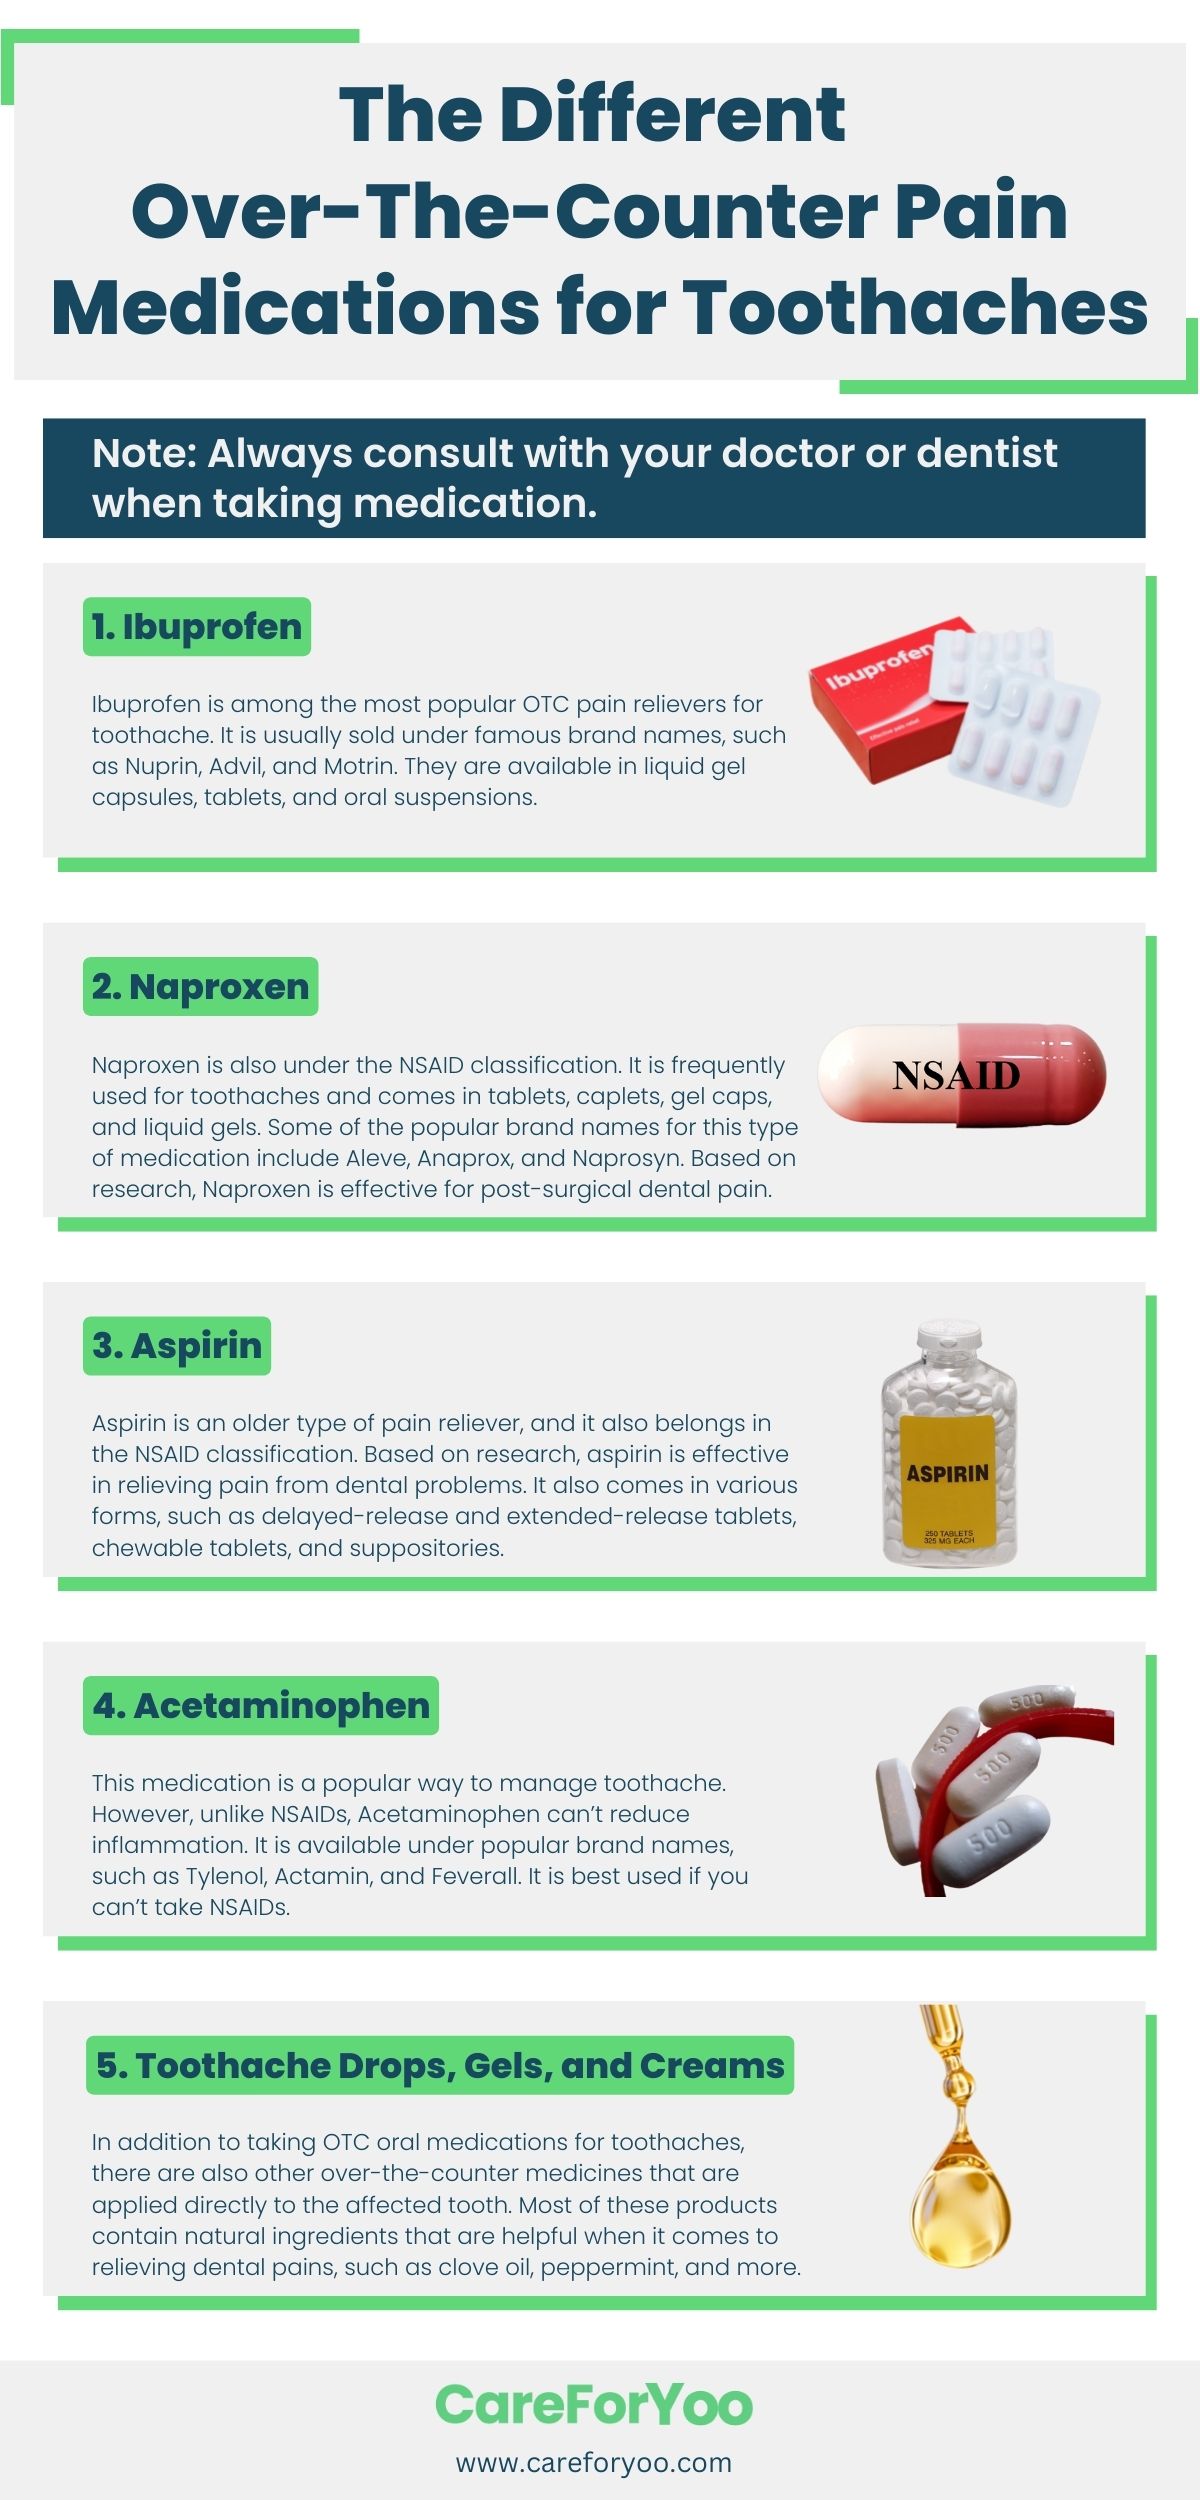 The Different Over-The-Counter Pain Medications for Toothaches